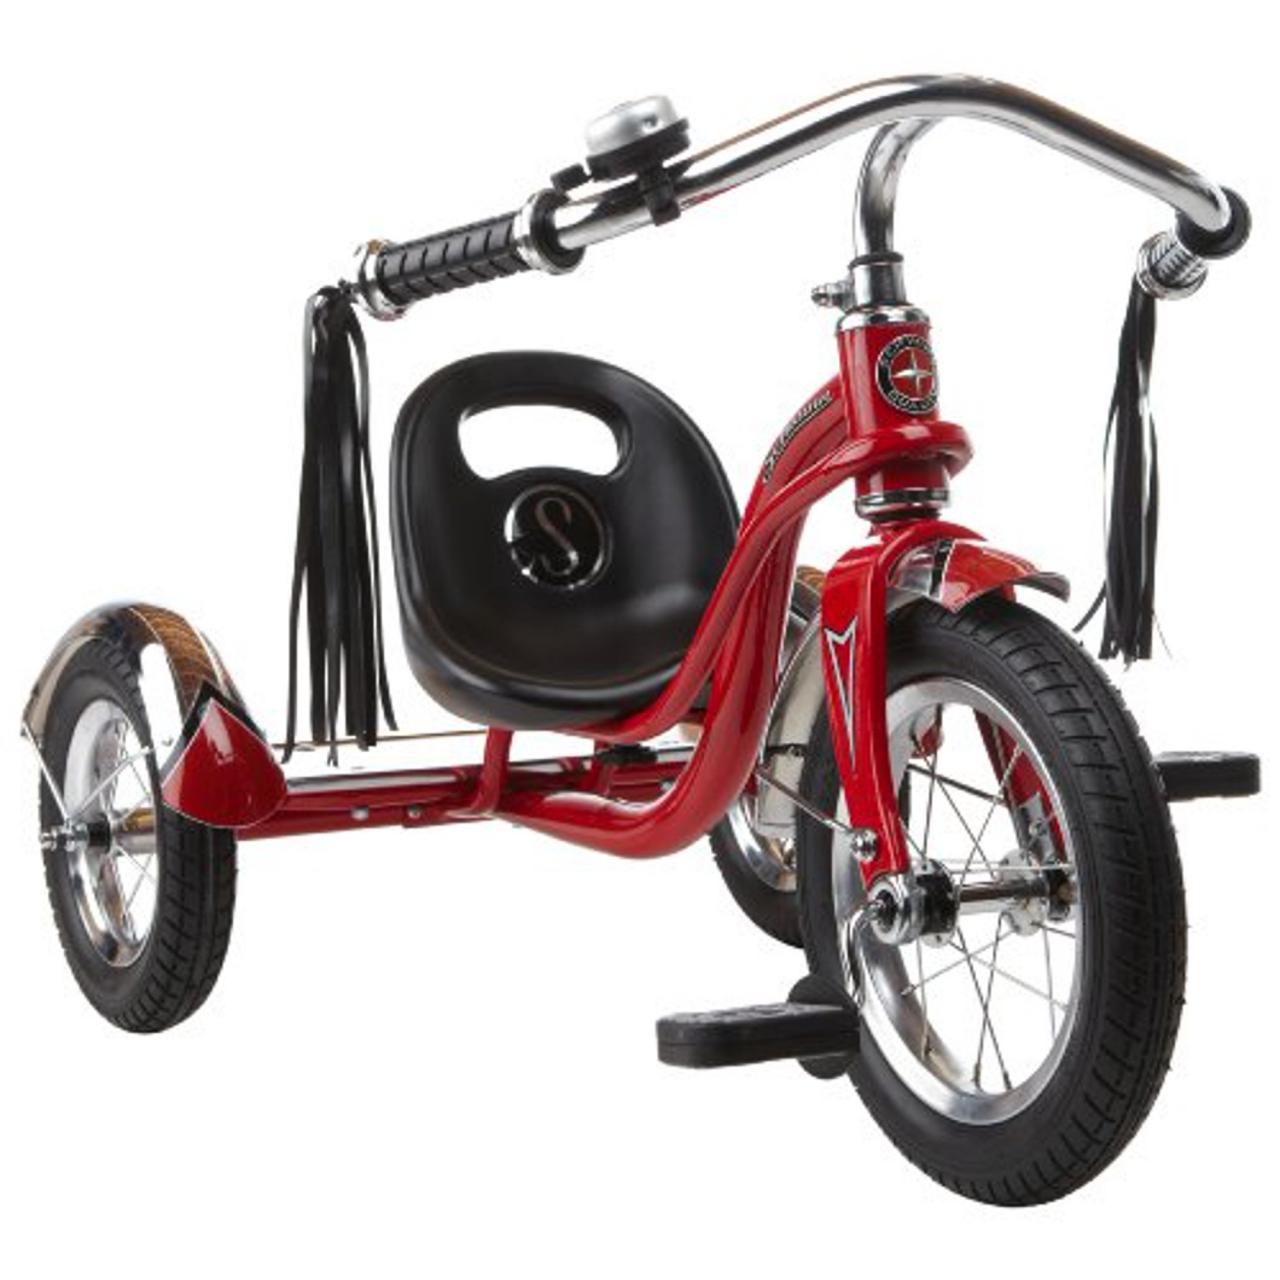 Schwinn Roadster Tricycle with Classic Bicycle Bell and Handlebar Tassels,  Featuring Retro Steel Frame and Adjustable Seat, fo | Walmart Canada